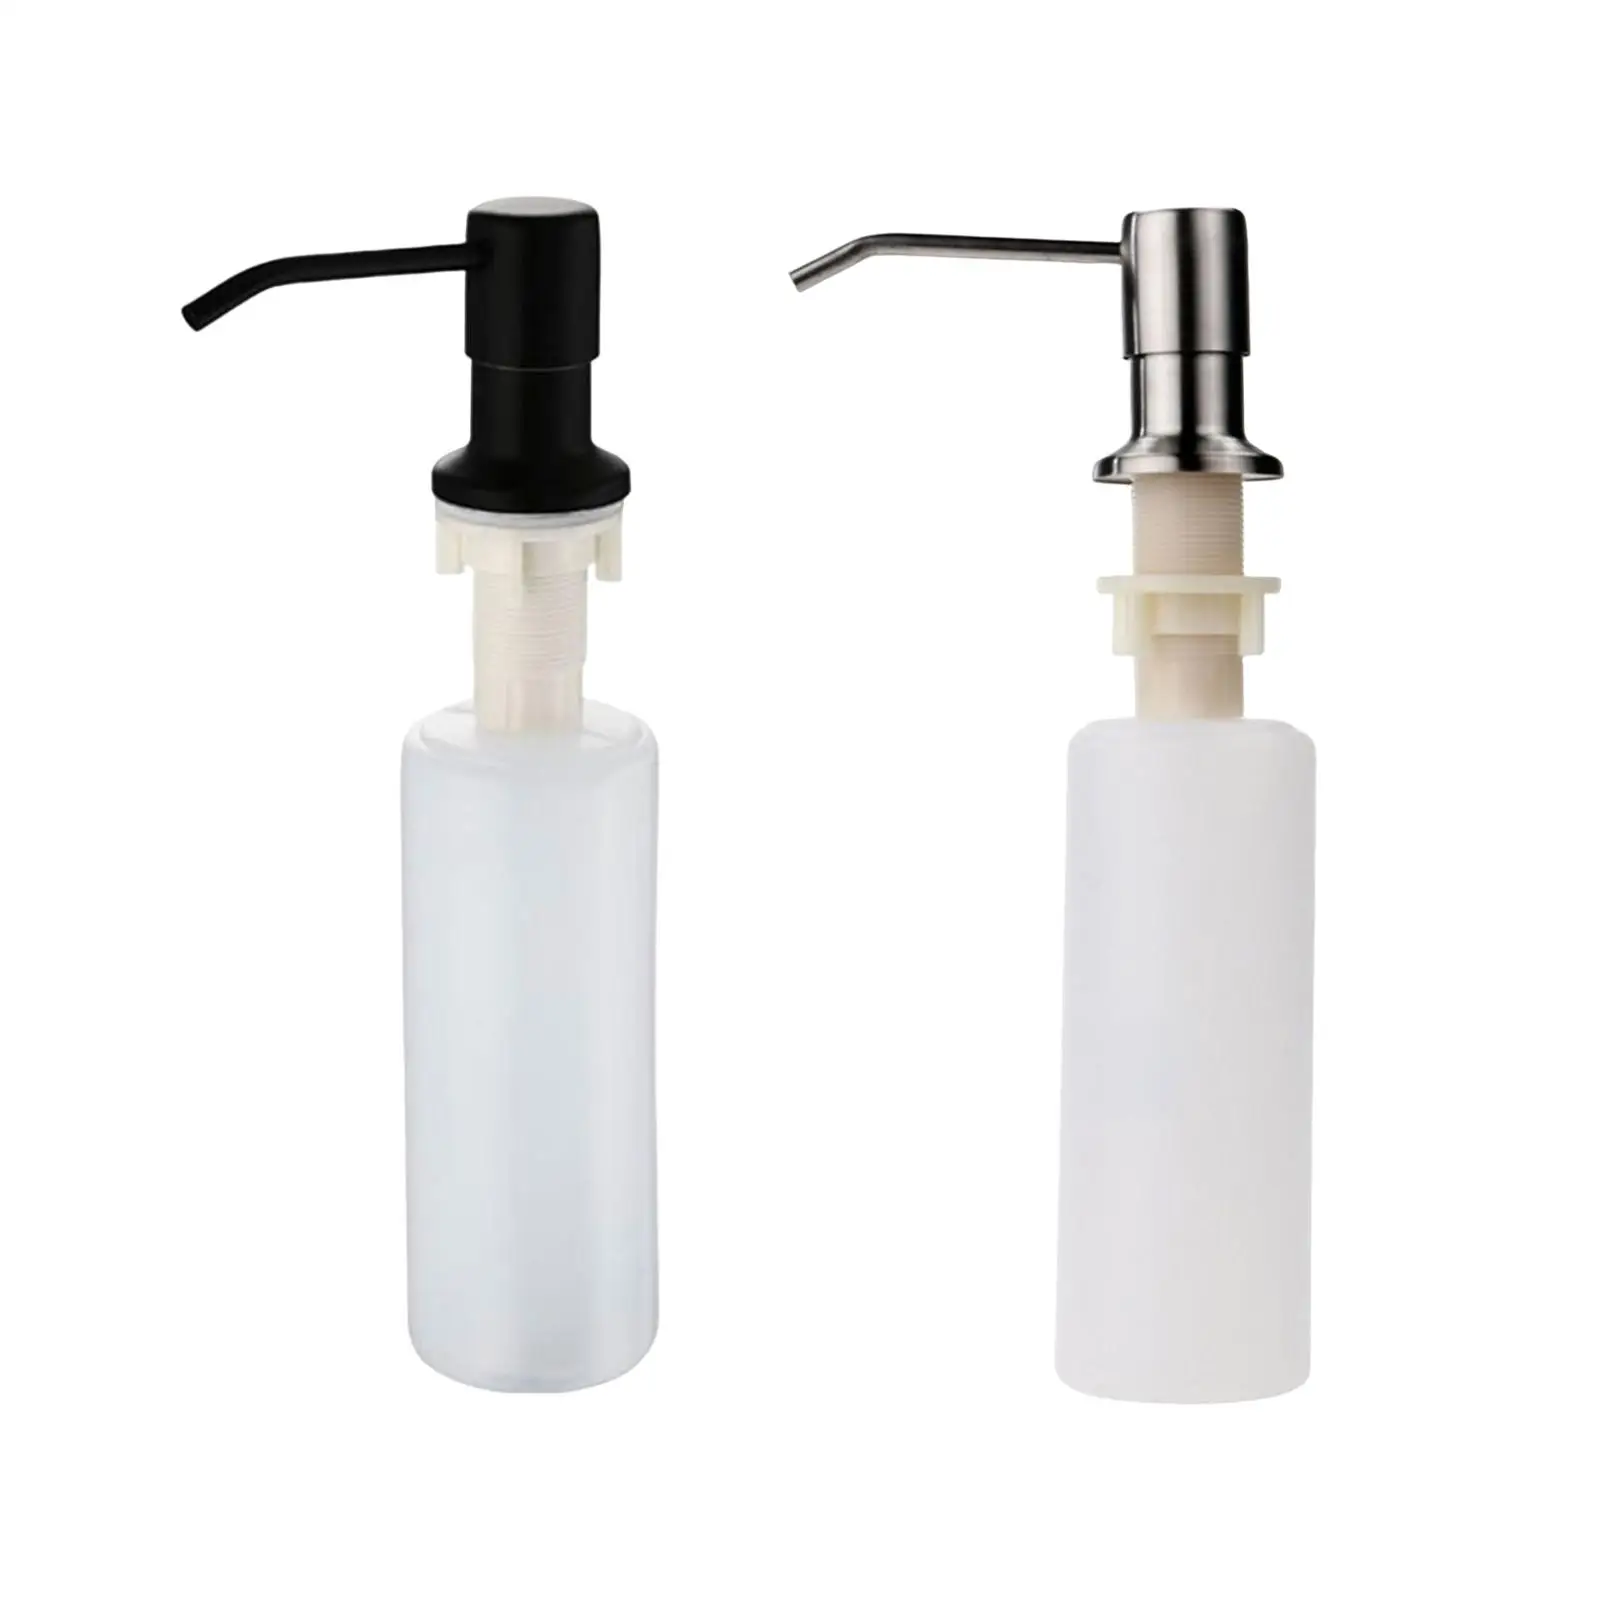 Soap Dispenser Stainless Steel Convenient Lotion Bottle Reusable Pump for Sink Opening 25mm~36mm Bathroom Hotel Supply Kitchen